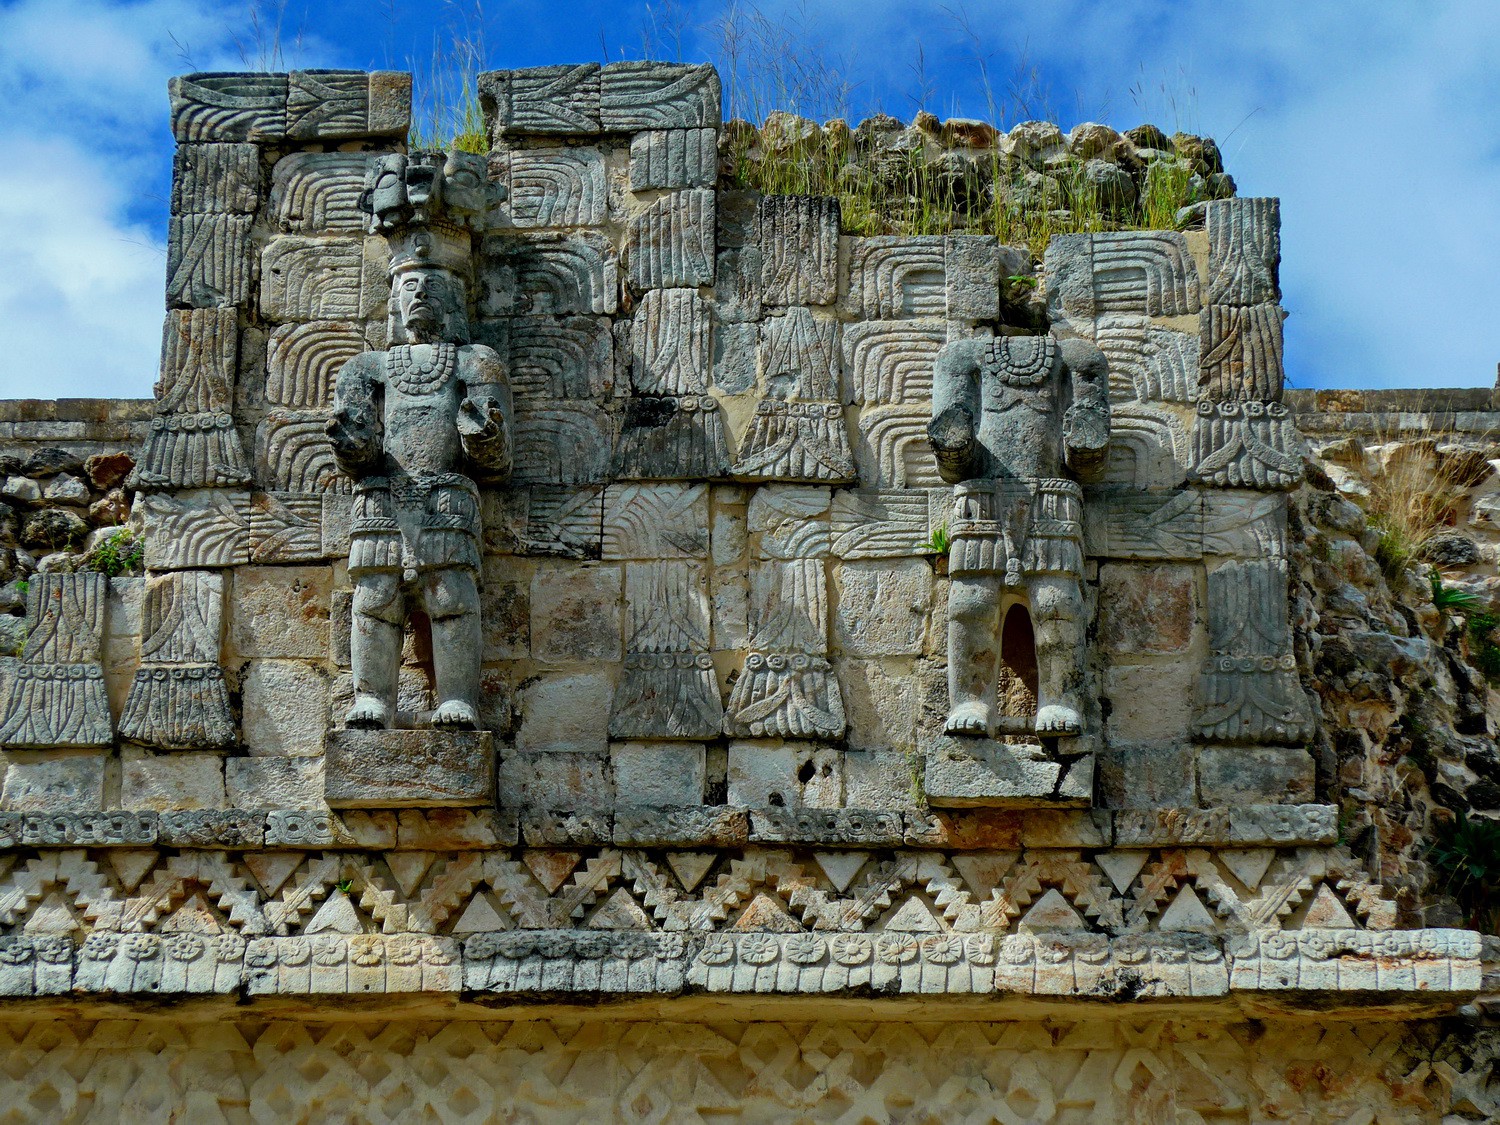 Two male figures in Kabáh - the left one wears a jaguar mask atop his head